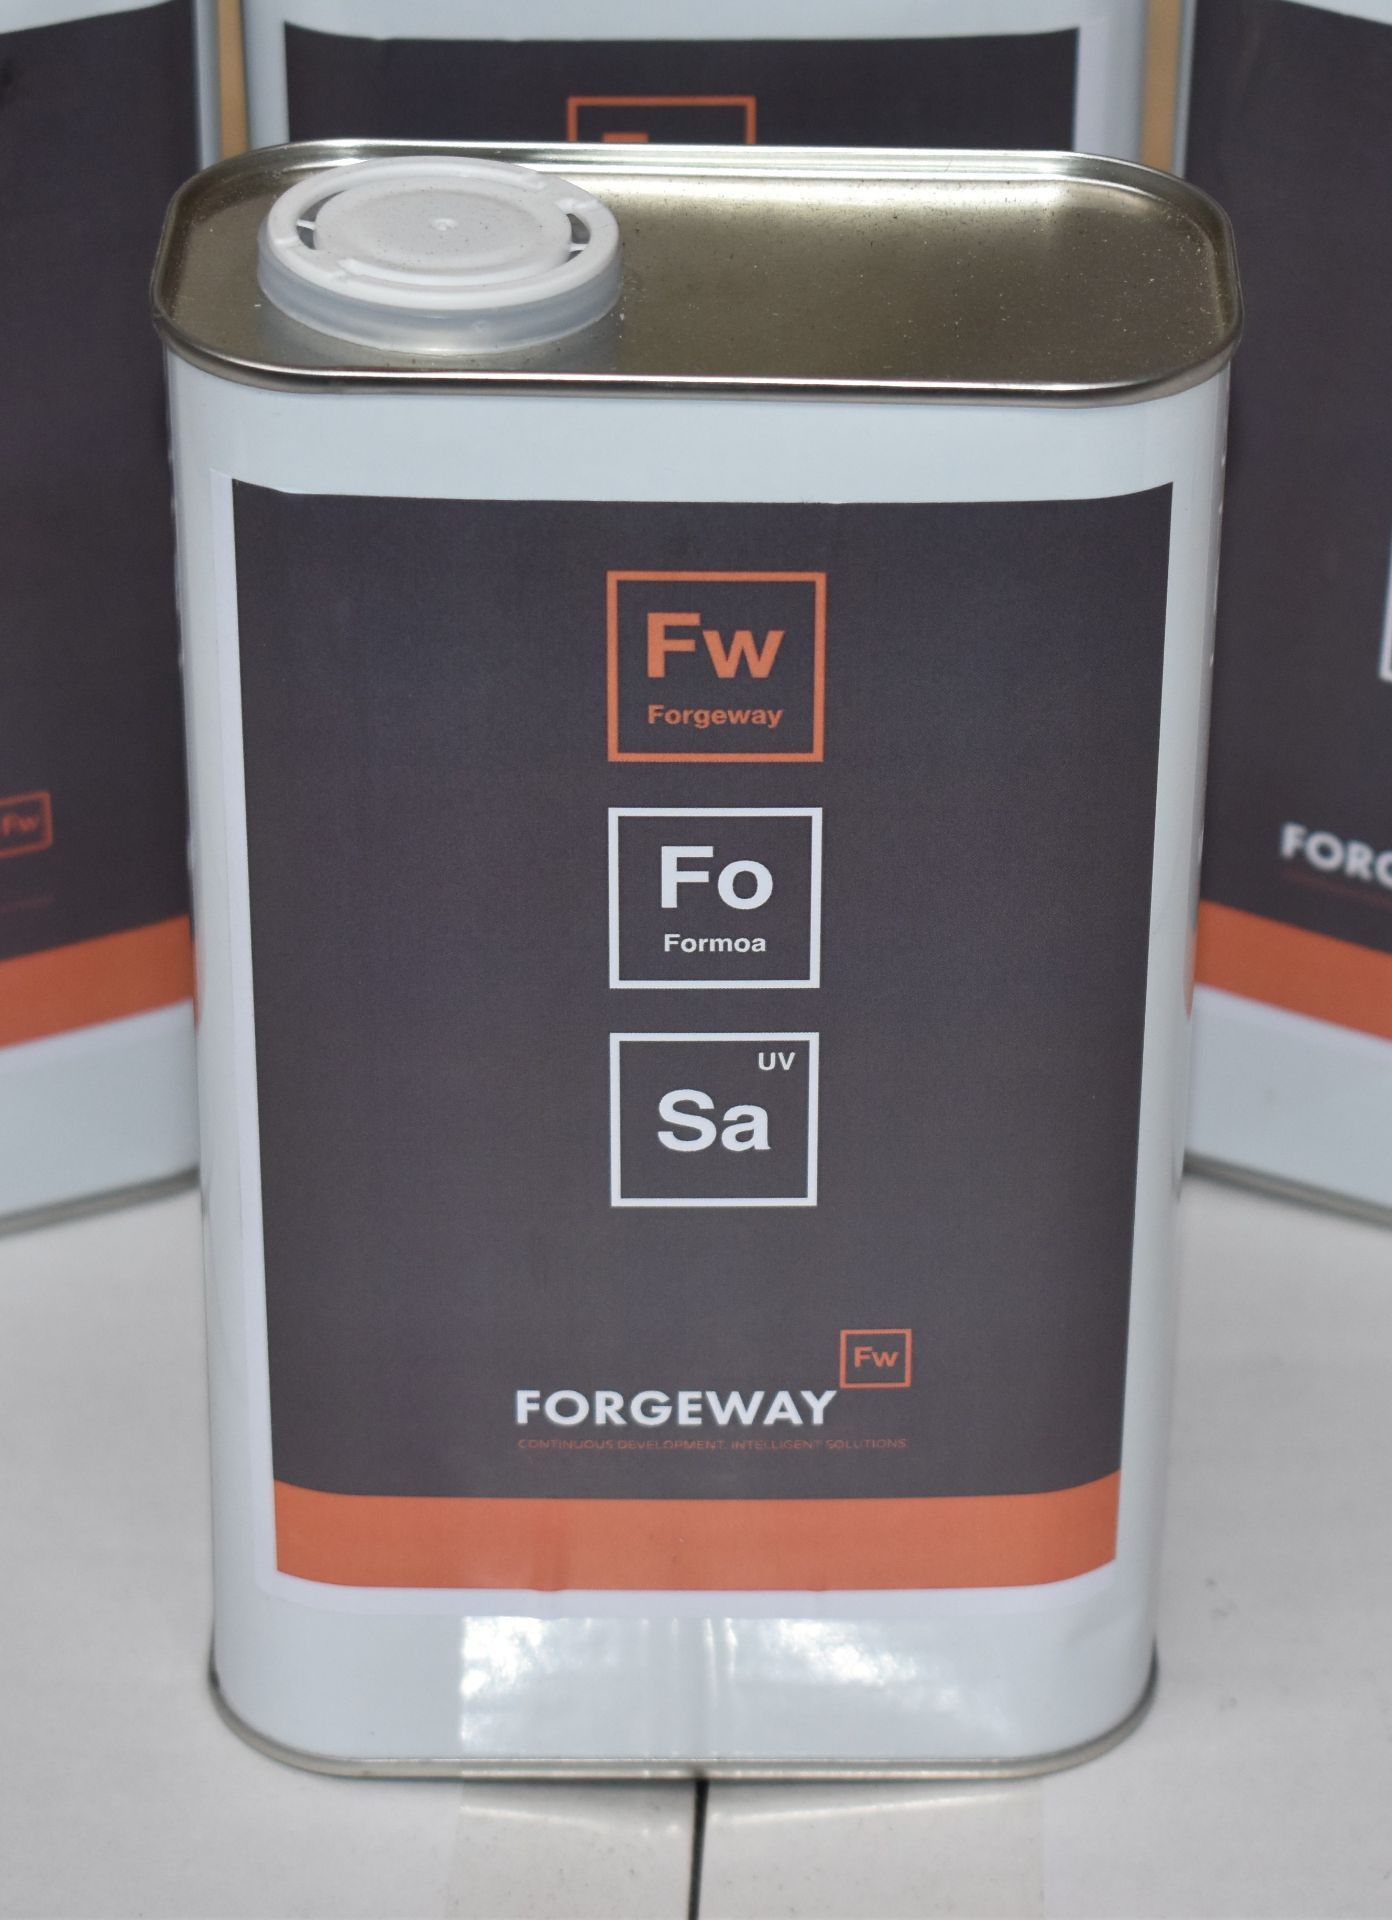 120 x Forgeway Formoa Surface Activator 1 Litre Containers - Adhesion Promotor, Cleaner, Degreaser